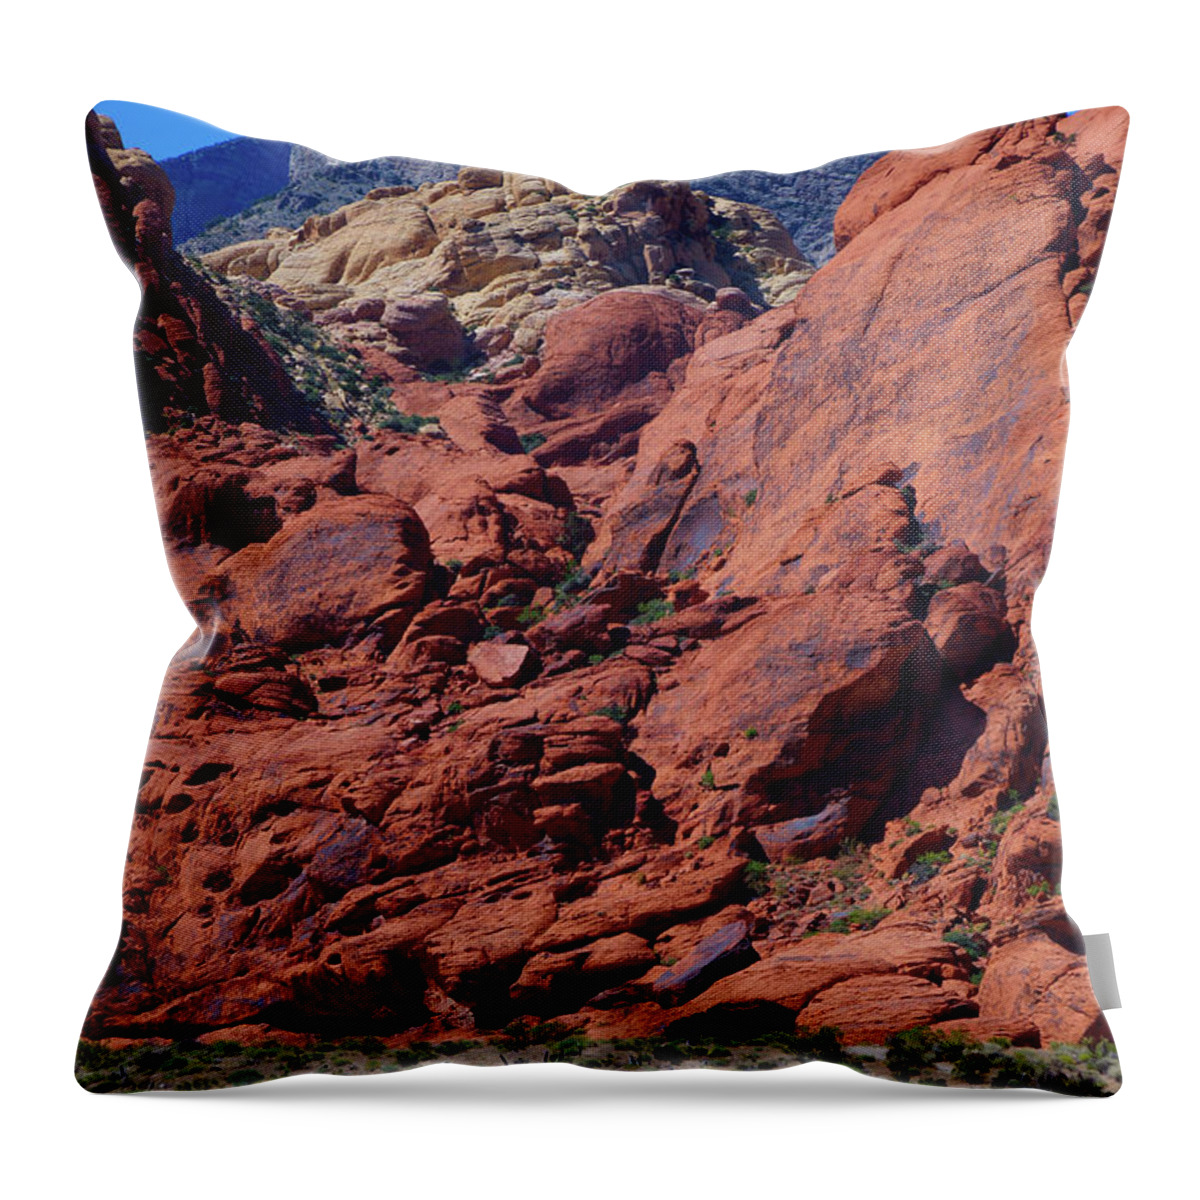  Throw Pillow featuring the photograph Earth Contrasts by Rodney Lee Williams